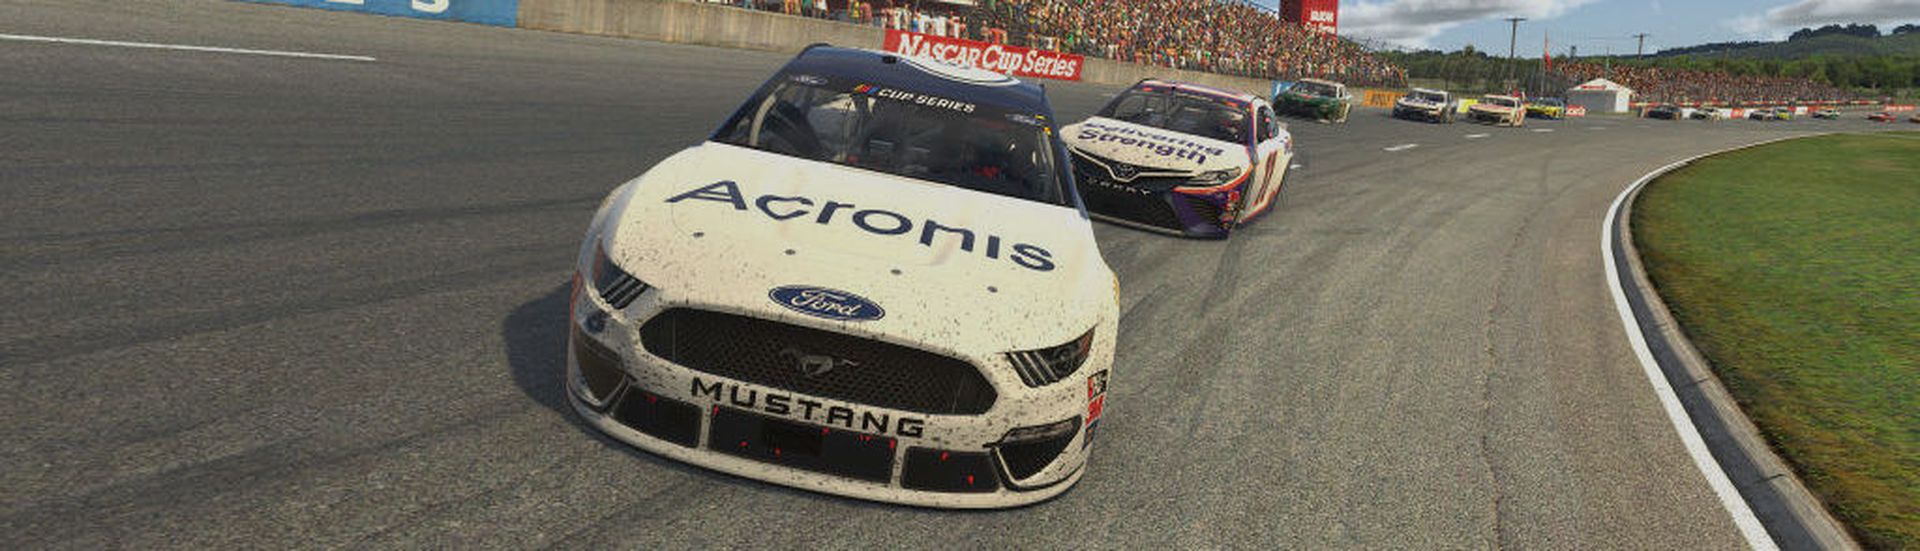 NORTH WILKESBORO, NORTH CAROLINA &#8211; MAY 09: (EDITORIAL USE ONLY) (Editors note: This image was computer generated in-game) Ross Chastain, driver of the #6 Acronis Ford, races  during the eNASCAR iRacing Pro Invitational Series North Wilkesboro 160 at virtual North Wilkesboro Speedway on May 09, 2020 in North Wilkesboro, North Carolina. (Photo ...